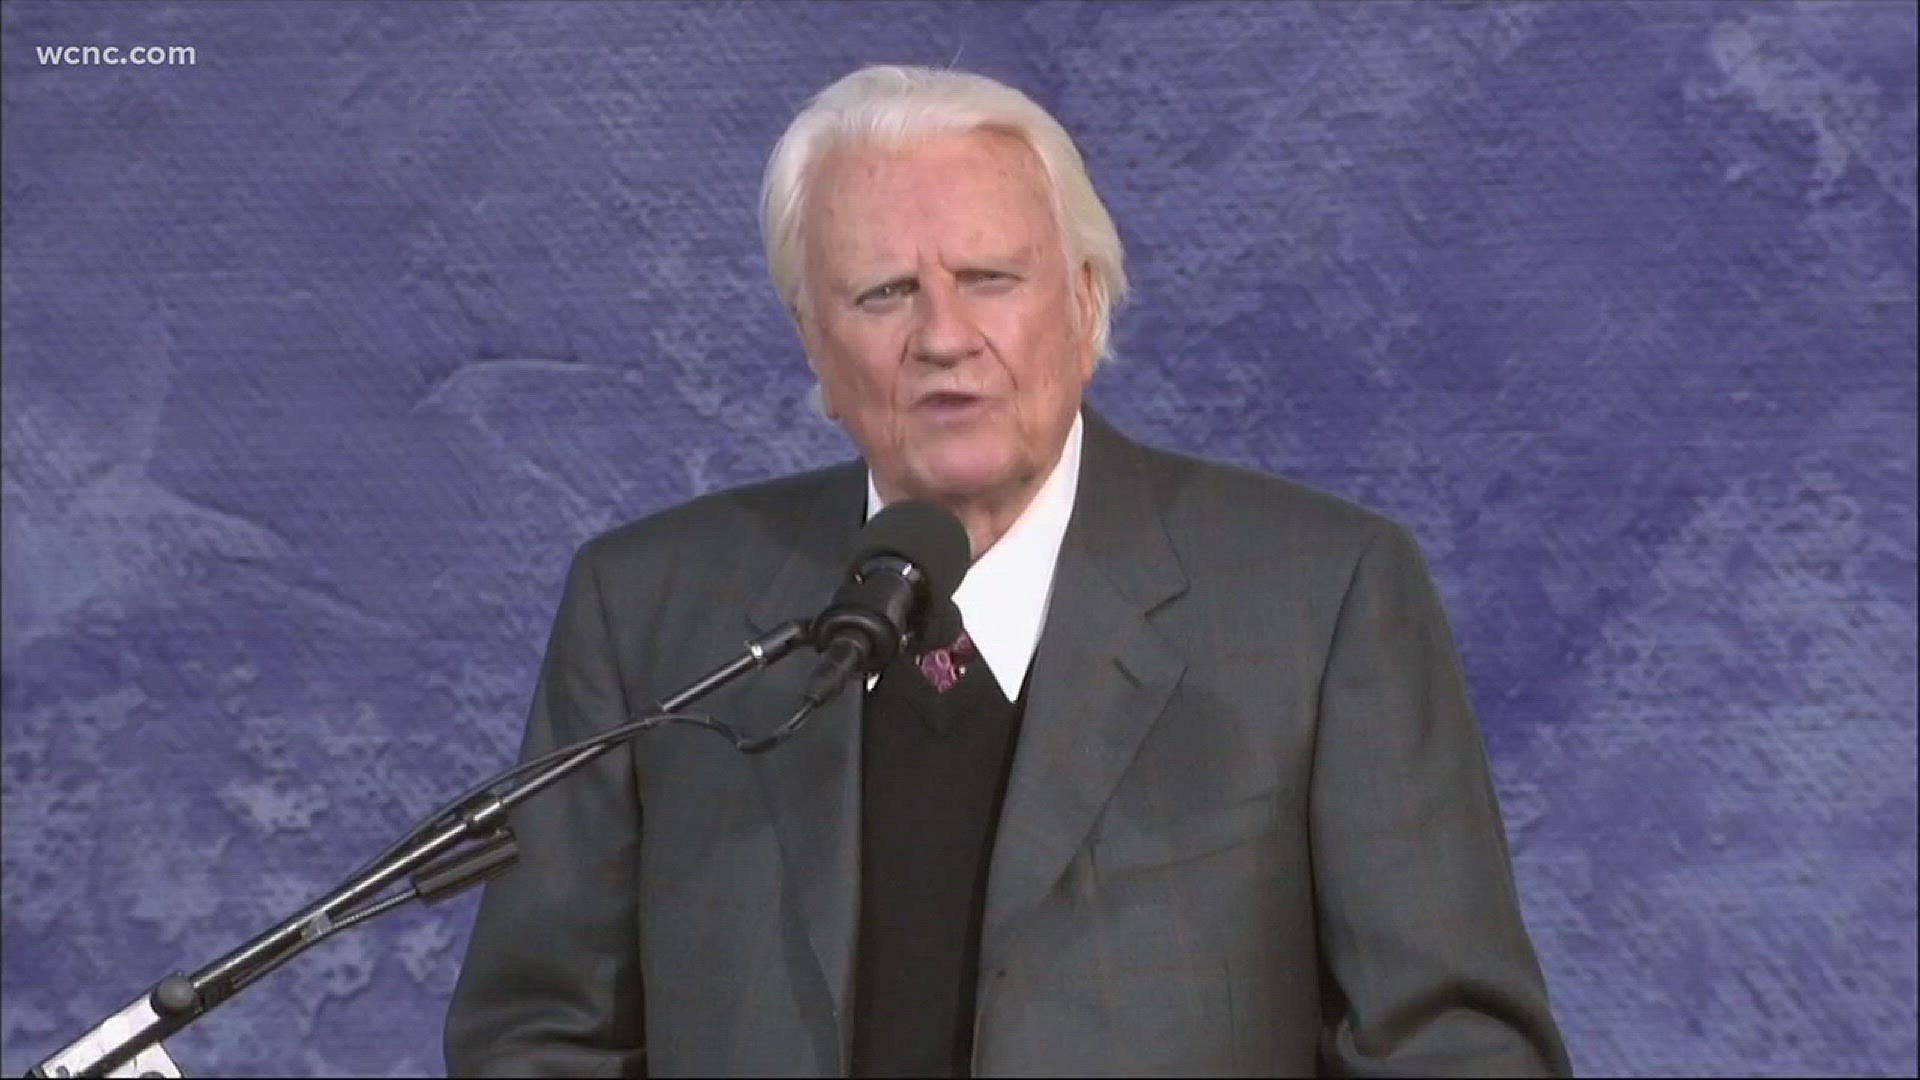 Rev. Billy Graham will become just the fourth private citizen to lie in honor at the U.S. Capitol Wednesday.